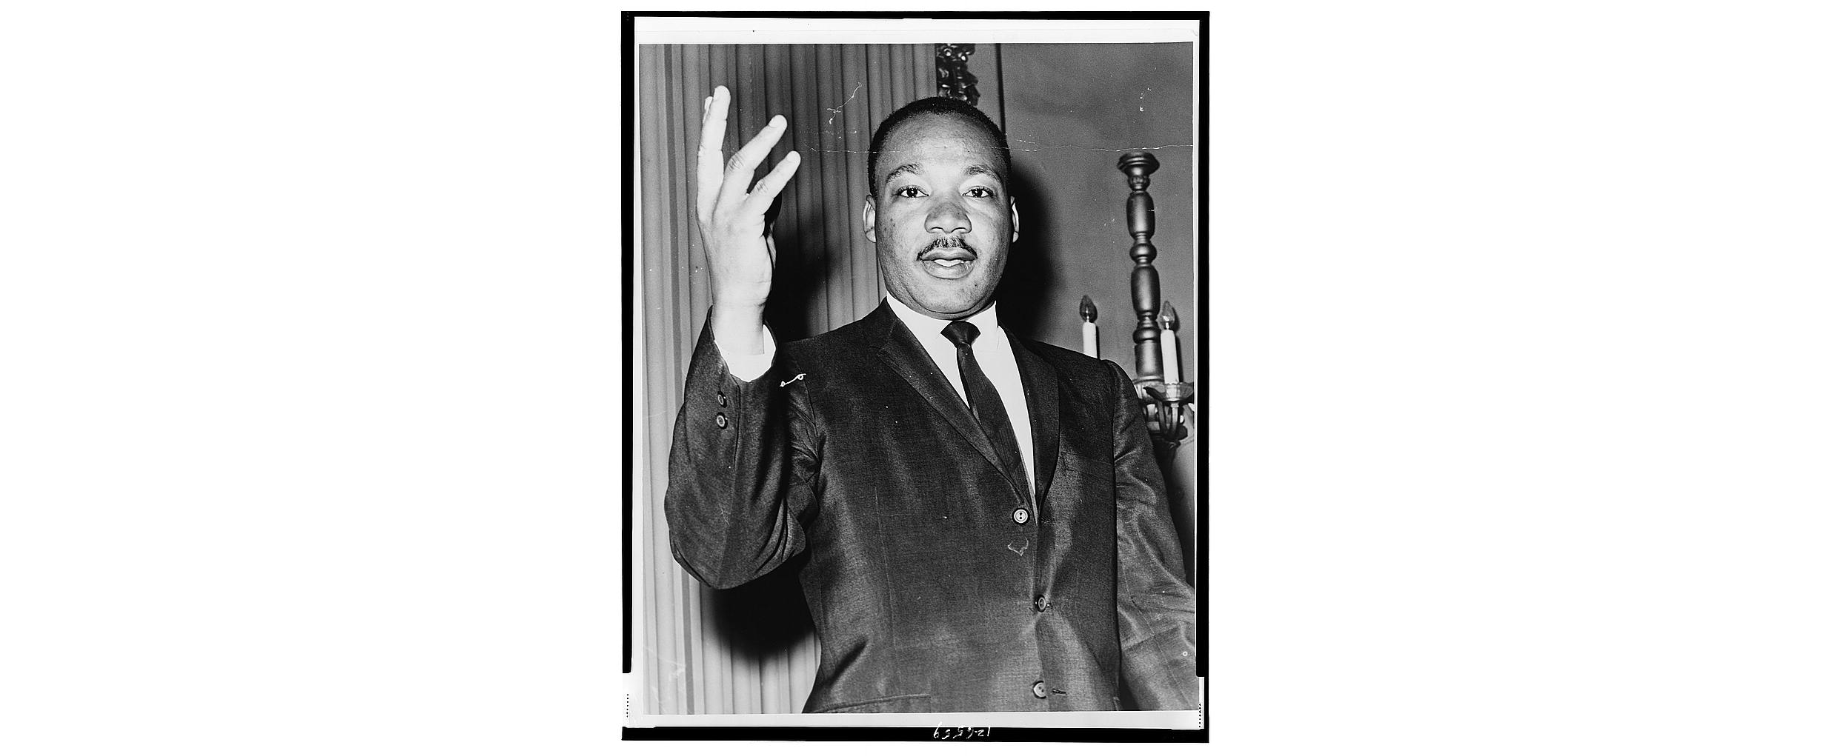 Martin Luther King Jr. Day, a day for remembrance and reflection. - The City of Asheville